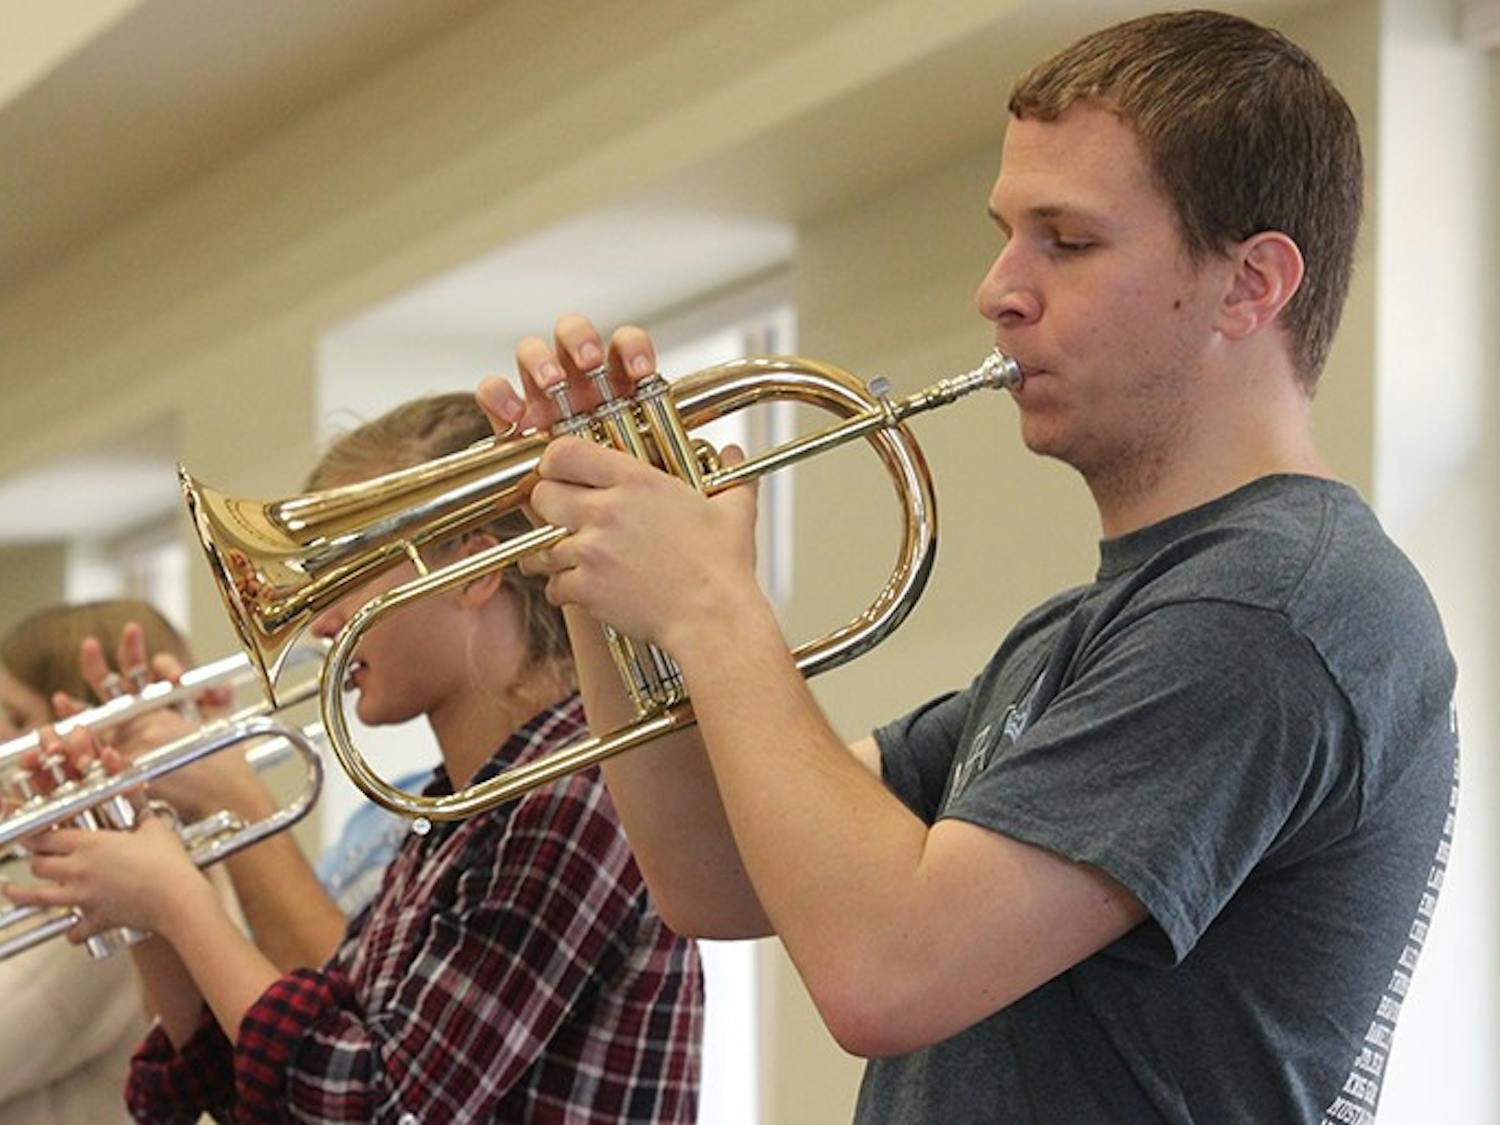 UNC students of the Department of Music practice for the upcoming Carolina Jazz Festival in conjunction with Jazz Week at Carolina, February 19th through the 23rd. The student ensemble is conducted by James Ketch, the Director of Jazz Studies and trumpet instructor at the university. 